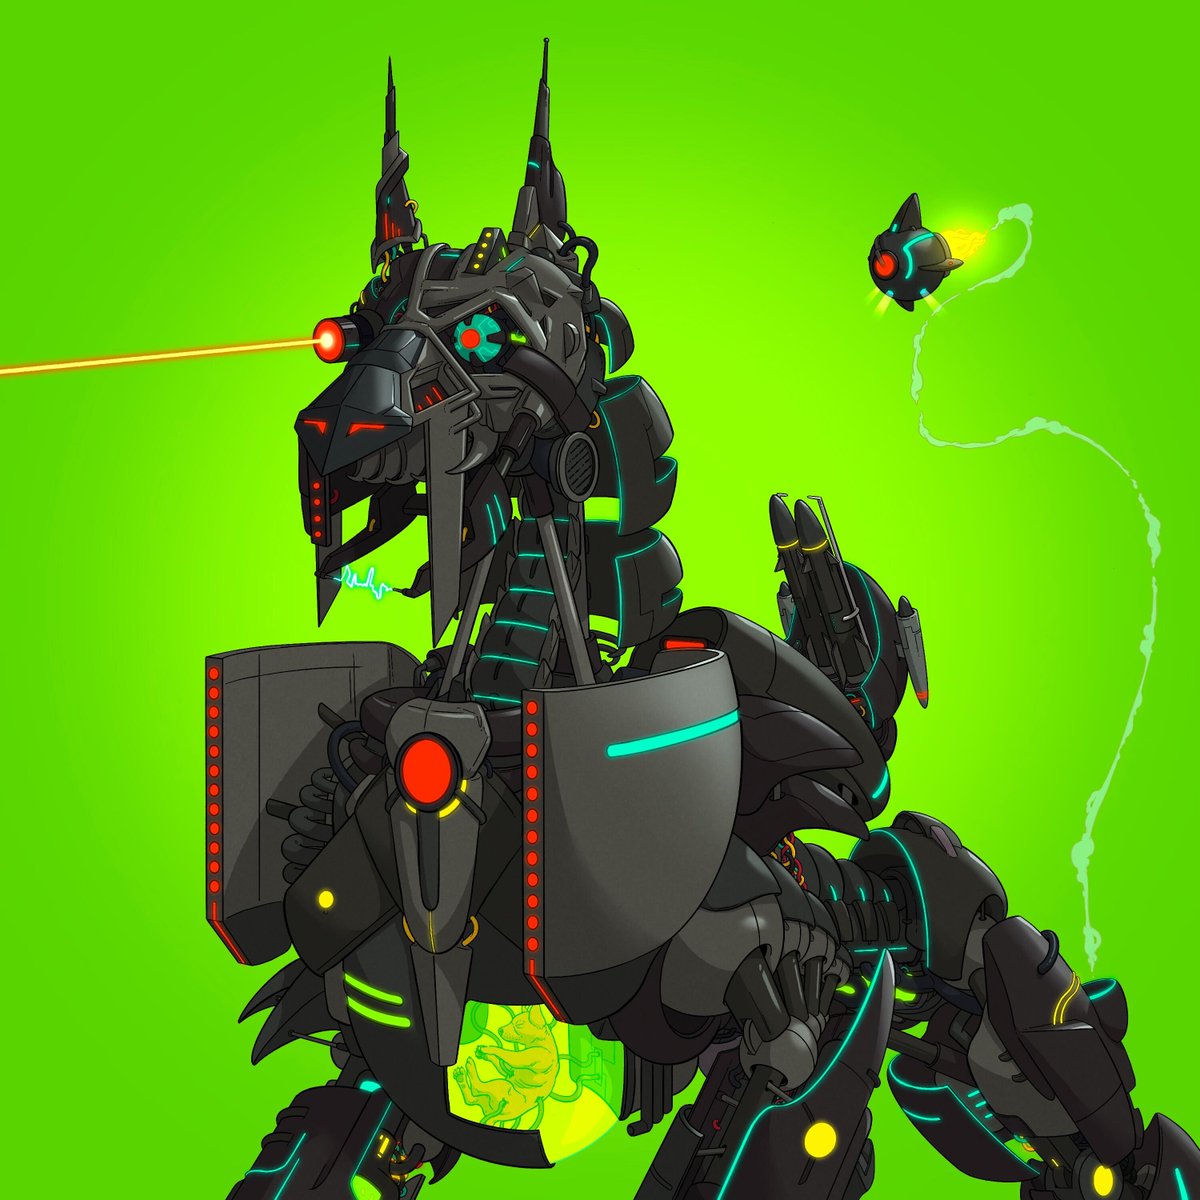 meet Ares, the Mega Robot Hound. Ares was forged in the cavernous depths of Mount Sanctuary by Caleb Lockjaw, the nefarious hounds-keeper. carrying the same cybernetic upgrades as the famed Mega Robot, Ares is our last resort in the face of a perilous threat, or worse: war.